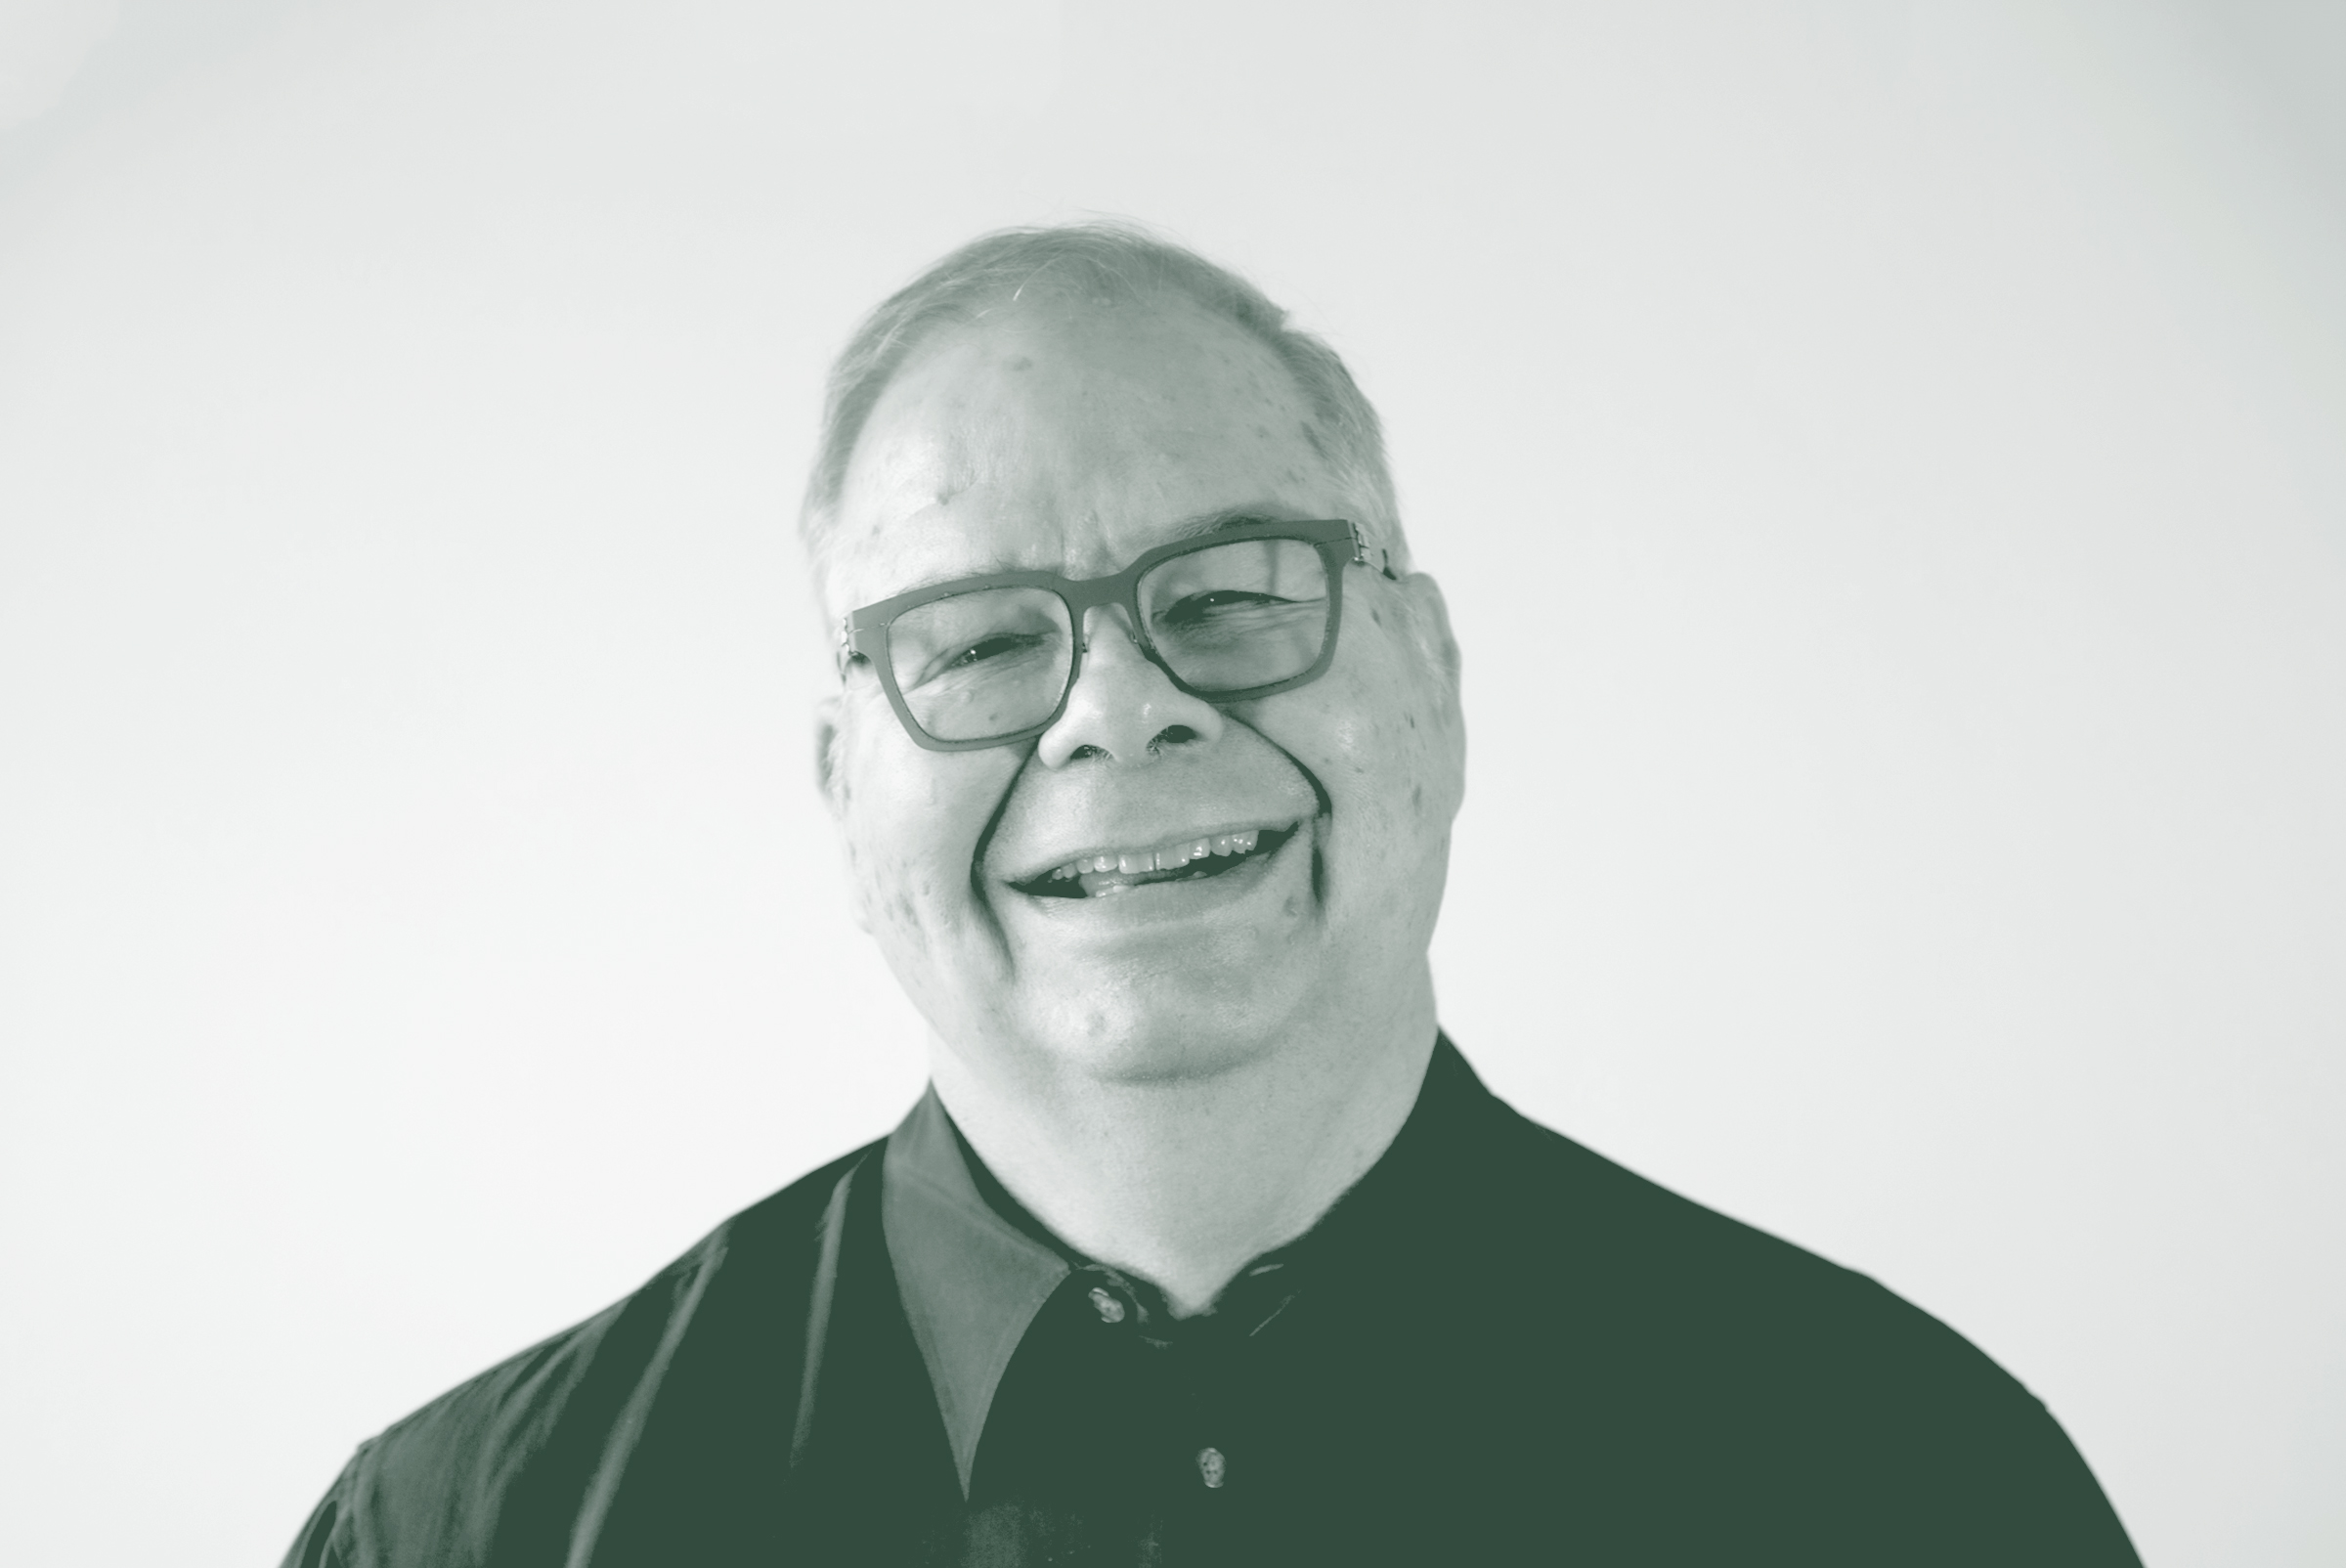 A black and white portrait of Donald R. Kubala, an Associate Principal and Senior Project Leader with GFF in the Faith & Community Studio, in front of a white background.